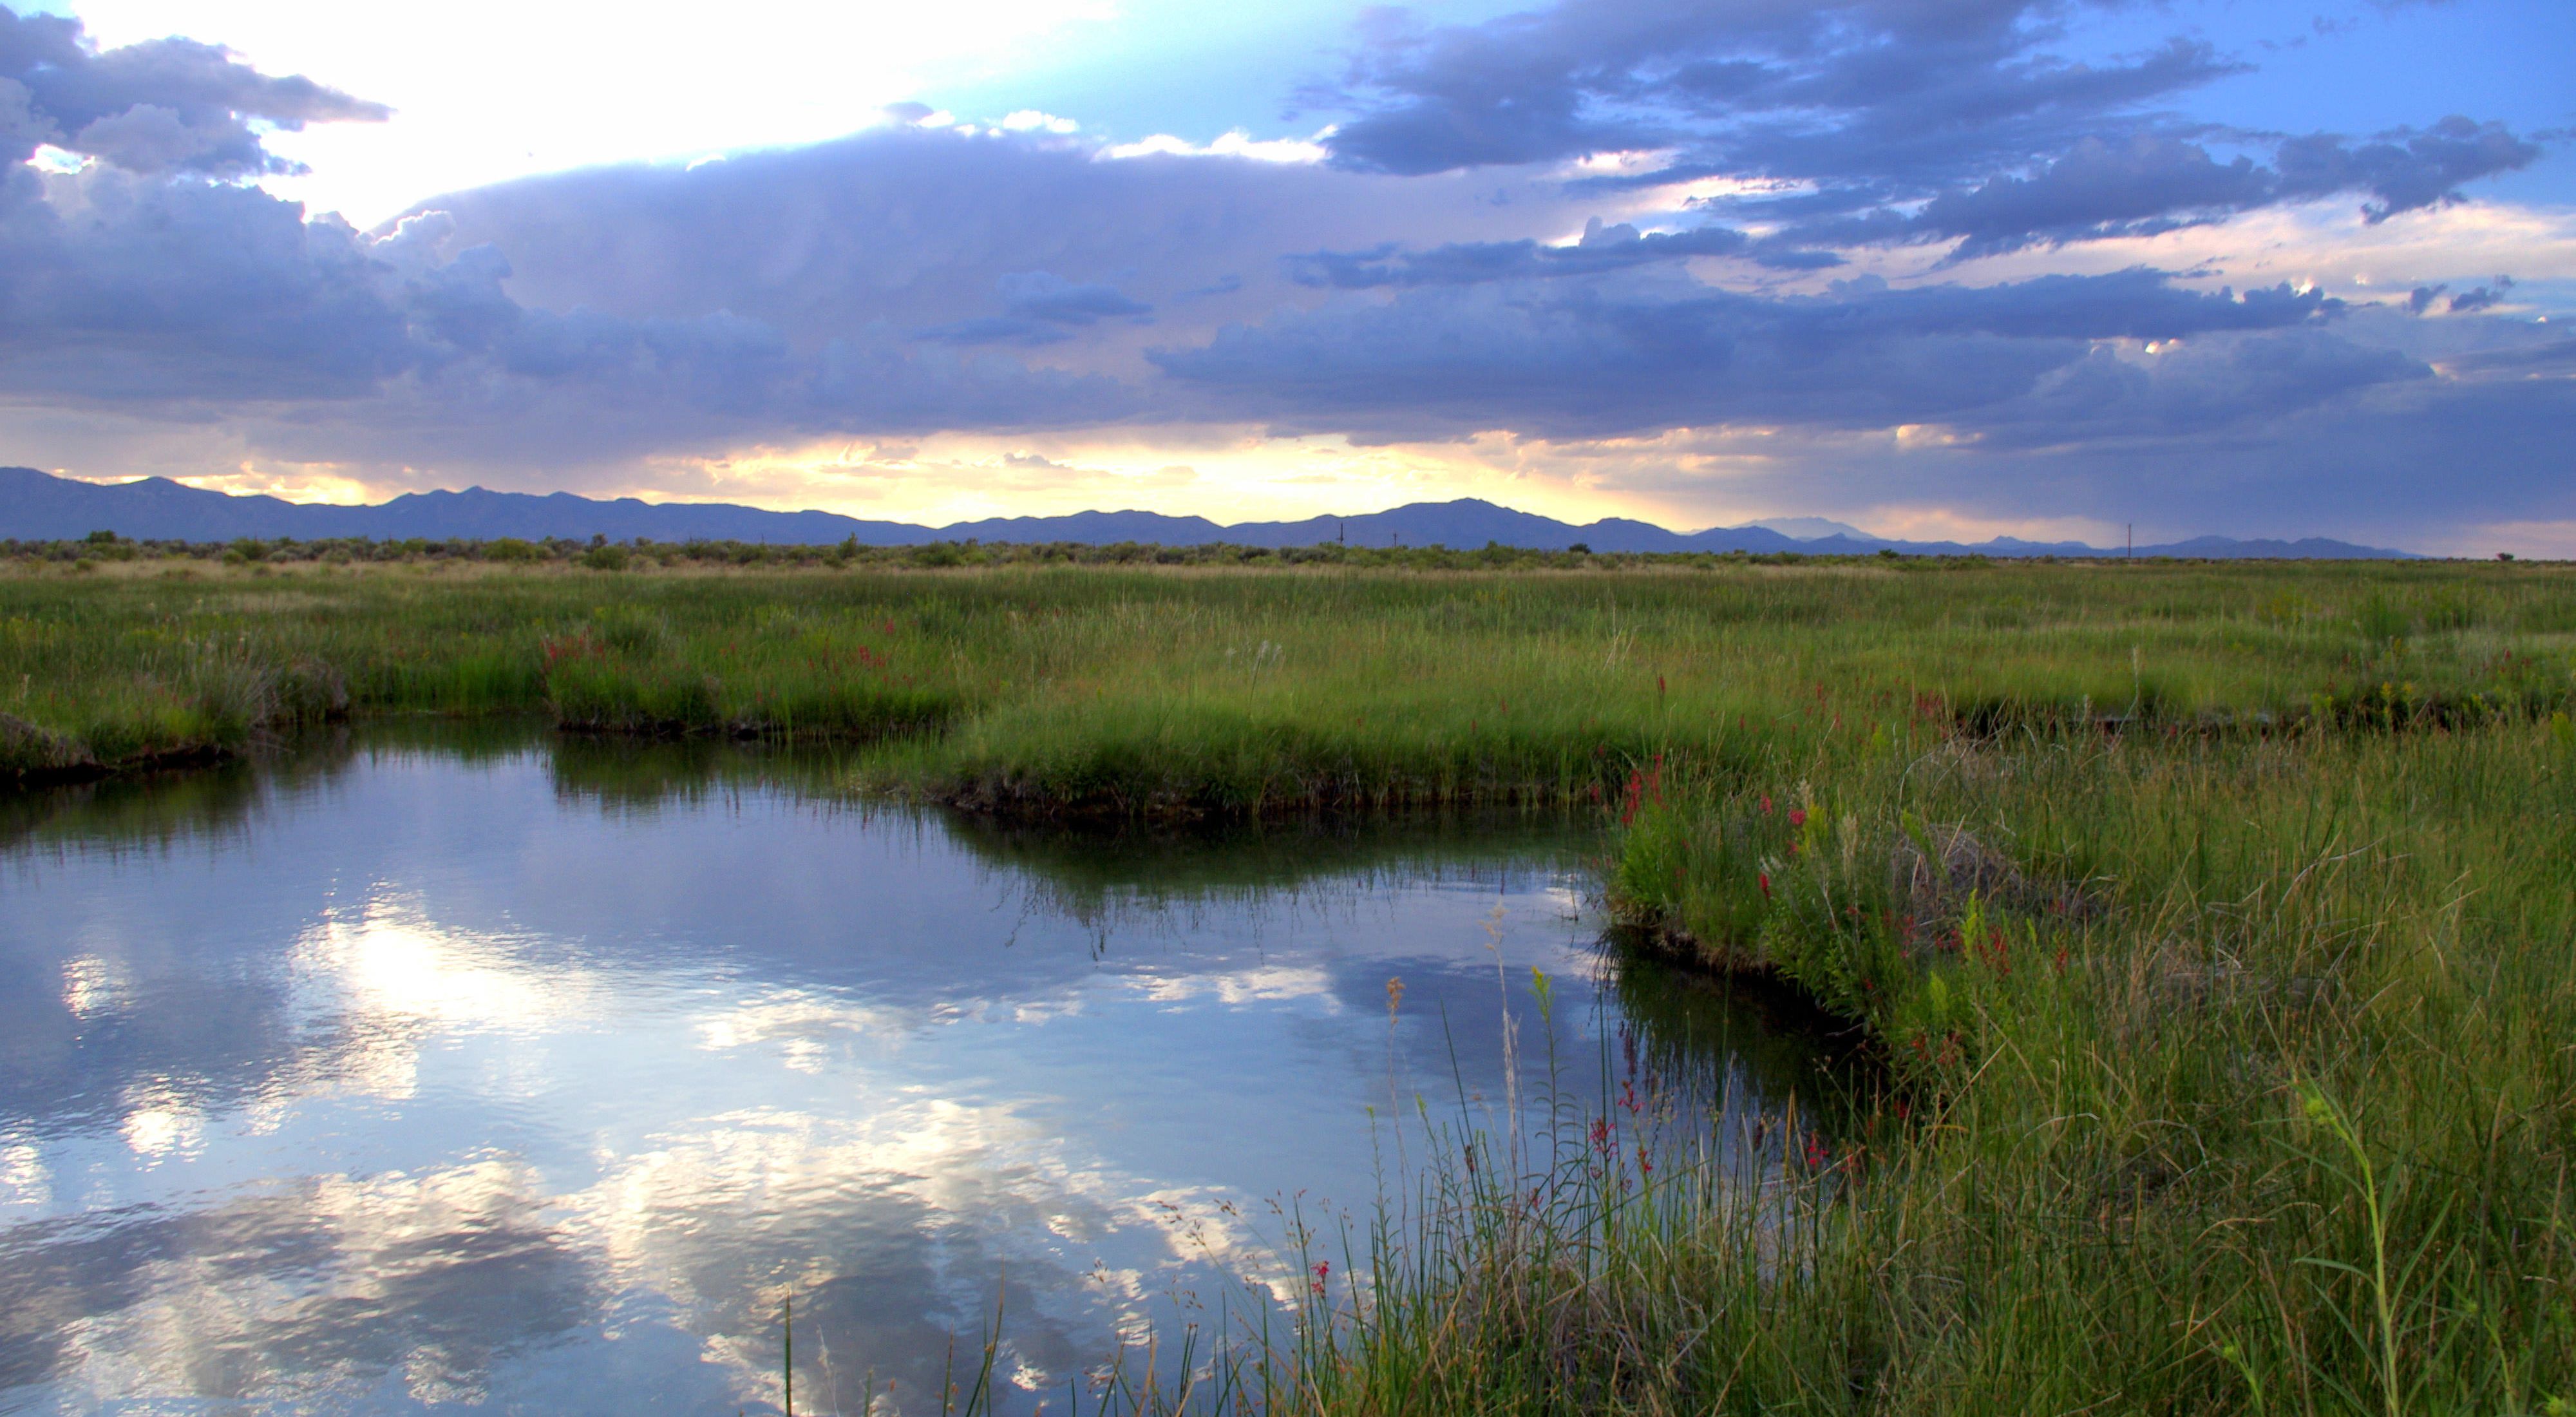 A pool of water surrounded by grasses at sunset with mountains in the background